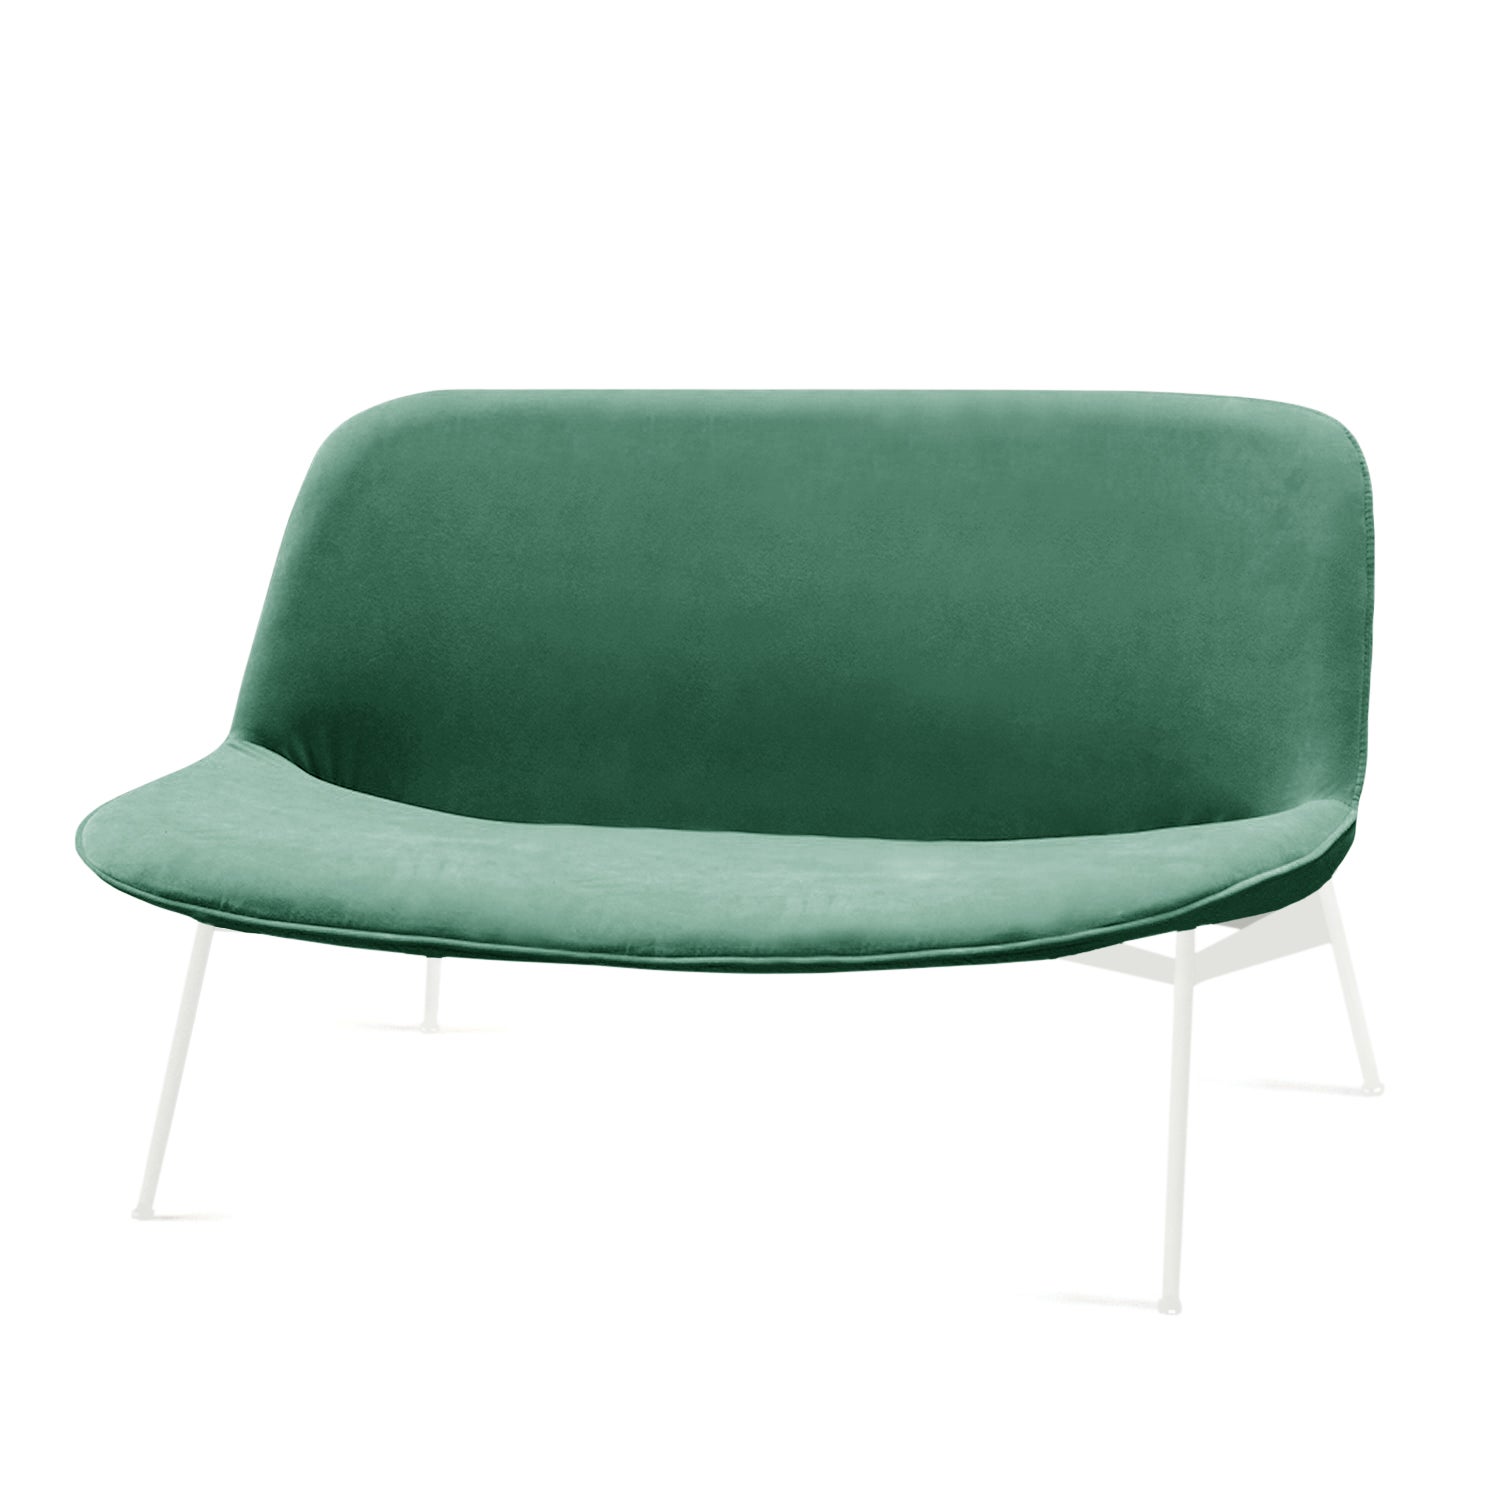 Chiado Sofa, Small with Paris Green and White For Sale